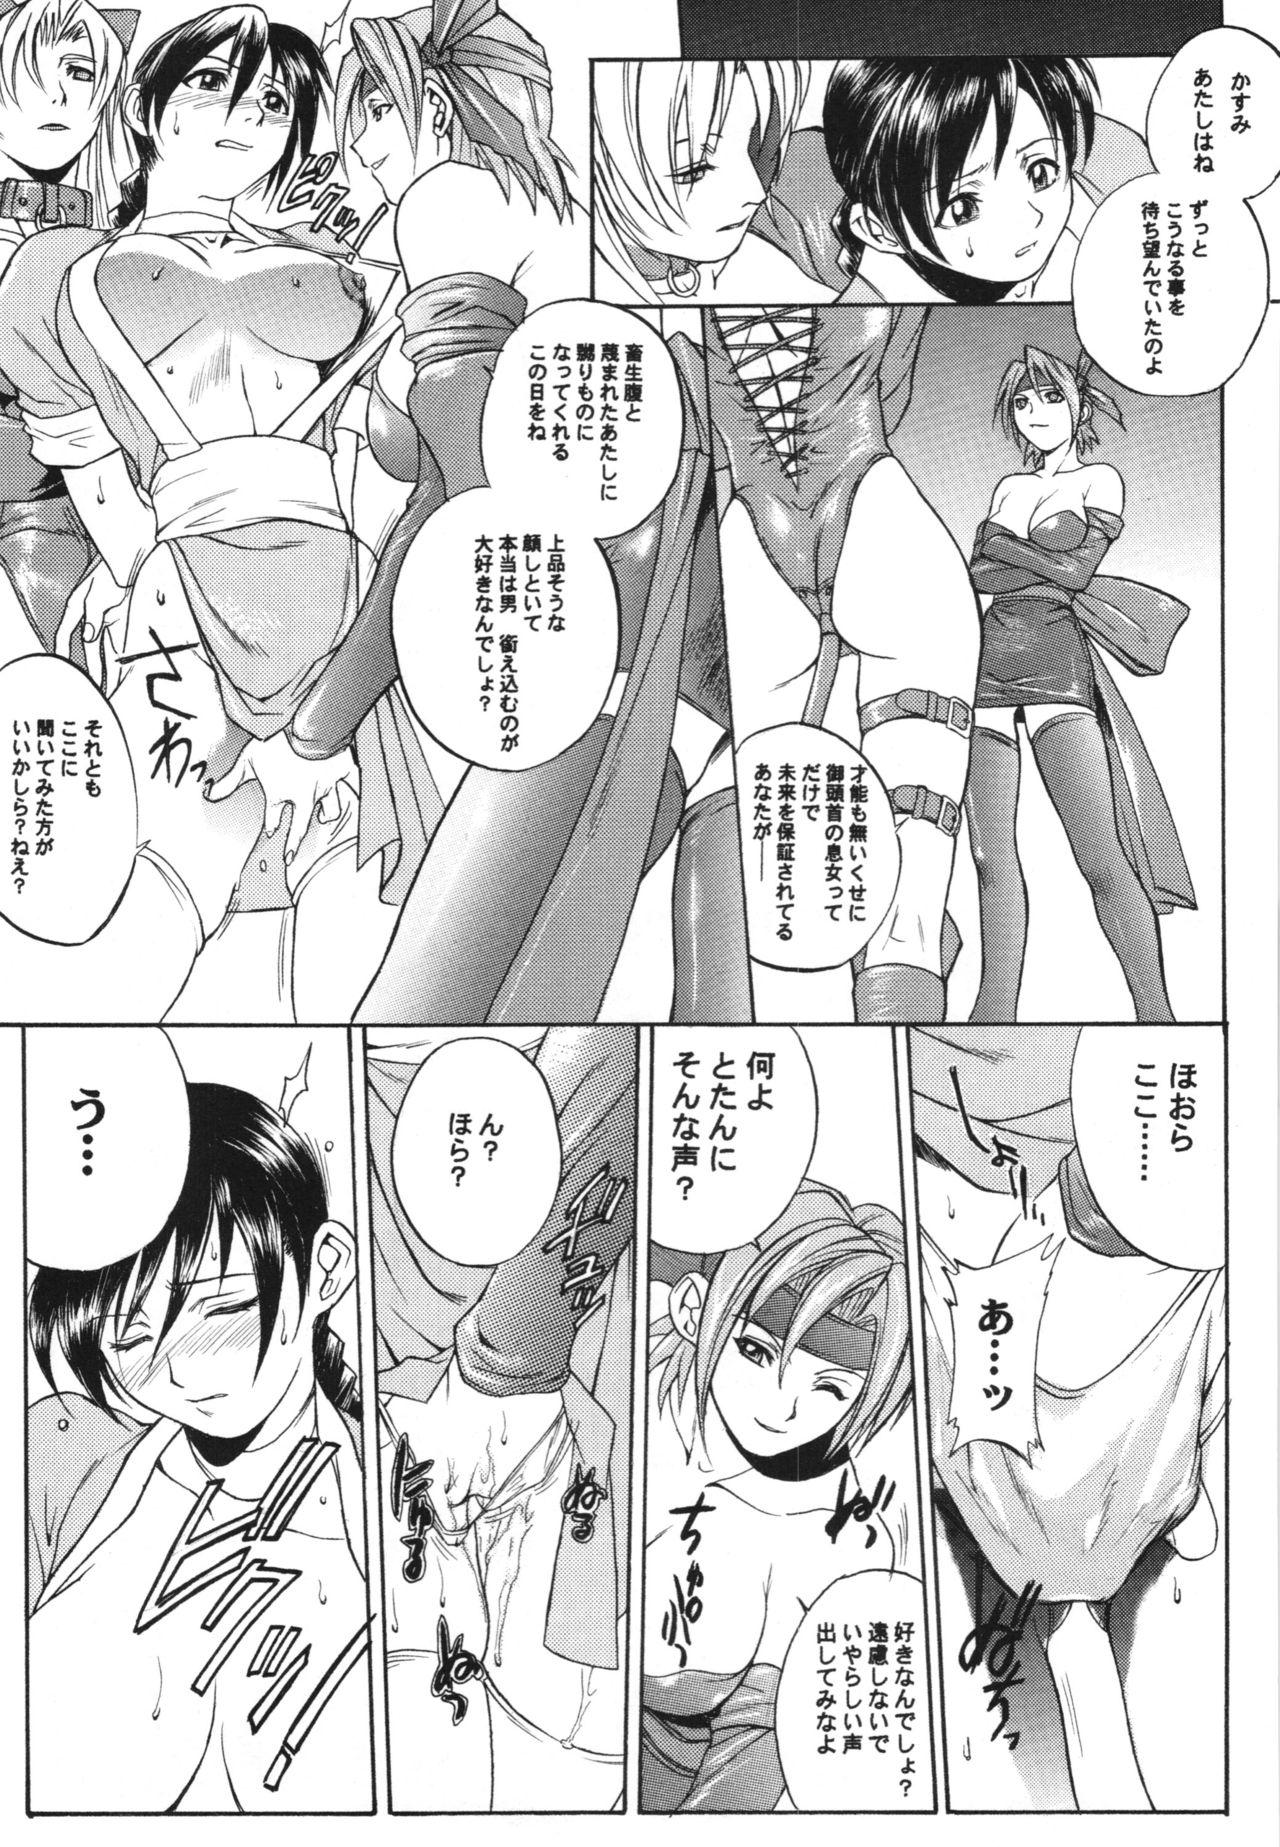 Affair WAY OF TEX-MEX Soushuuhen 3 + Omakebon - Dead or alive To heart Xenosaga Celeb - Page 11